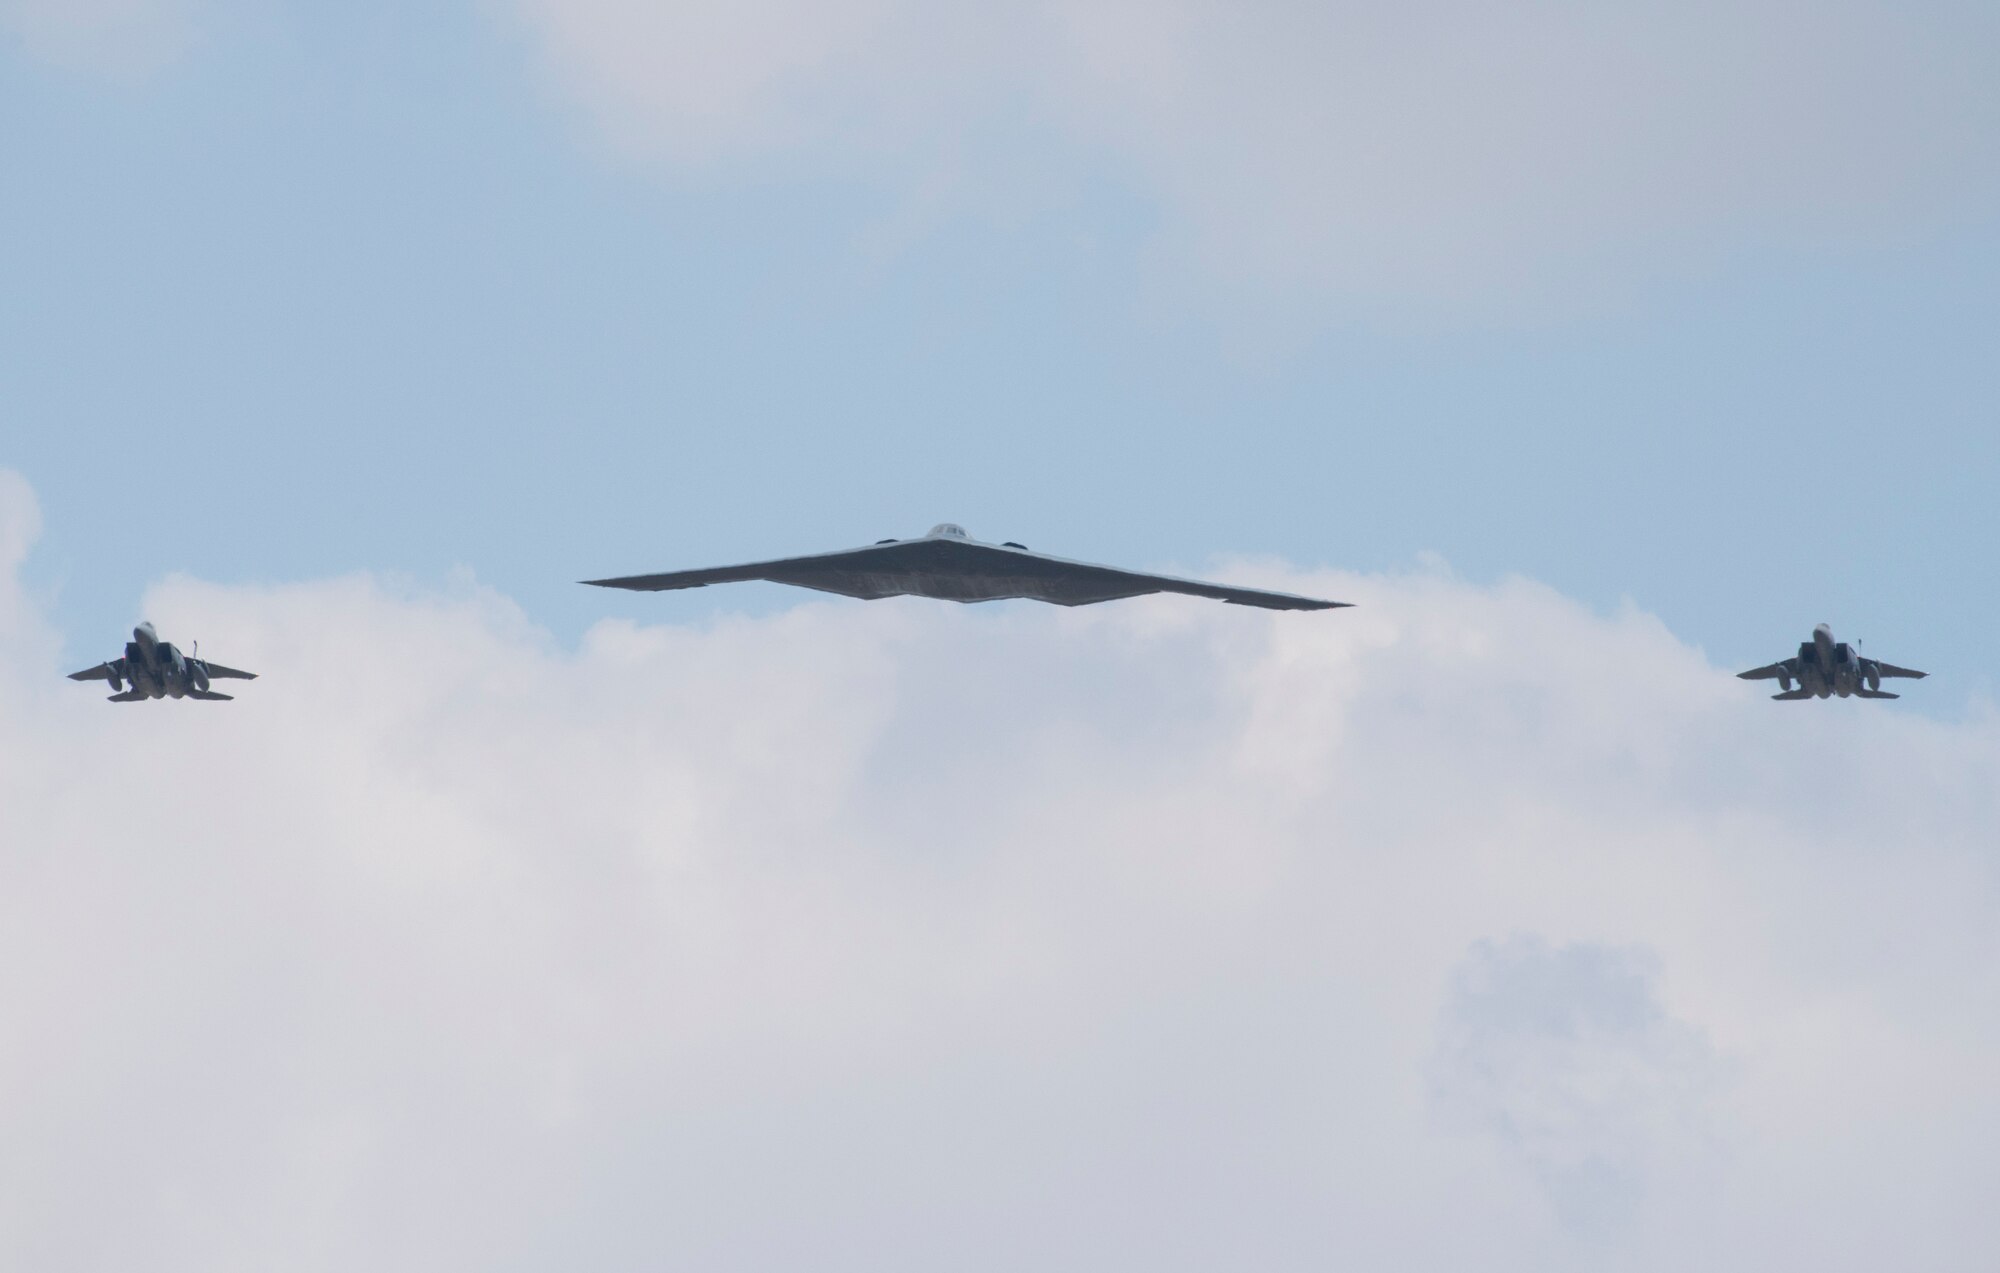 A U.S. Air Force B-2 Spirit and two F-15 Eagles fly past a crowd during the 2018 Royal International Air Tattoo (RIAT) at RAF Fairford, United Kingdom, July 14, 2018. This year’s RIAT celebrated the 100th anniversary of the RAF and highlighted the United States’ ever-strong alliance with the UK. (U.S. Air Force photo by Tech. Sgt. Brian Kimball)